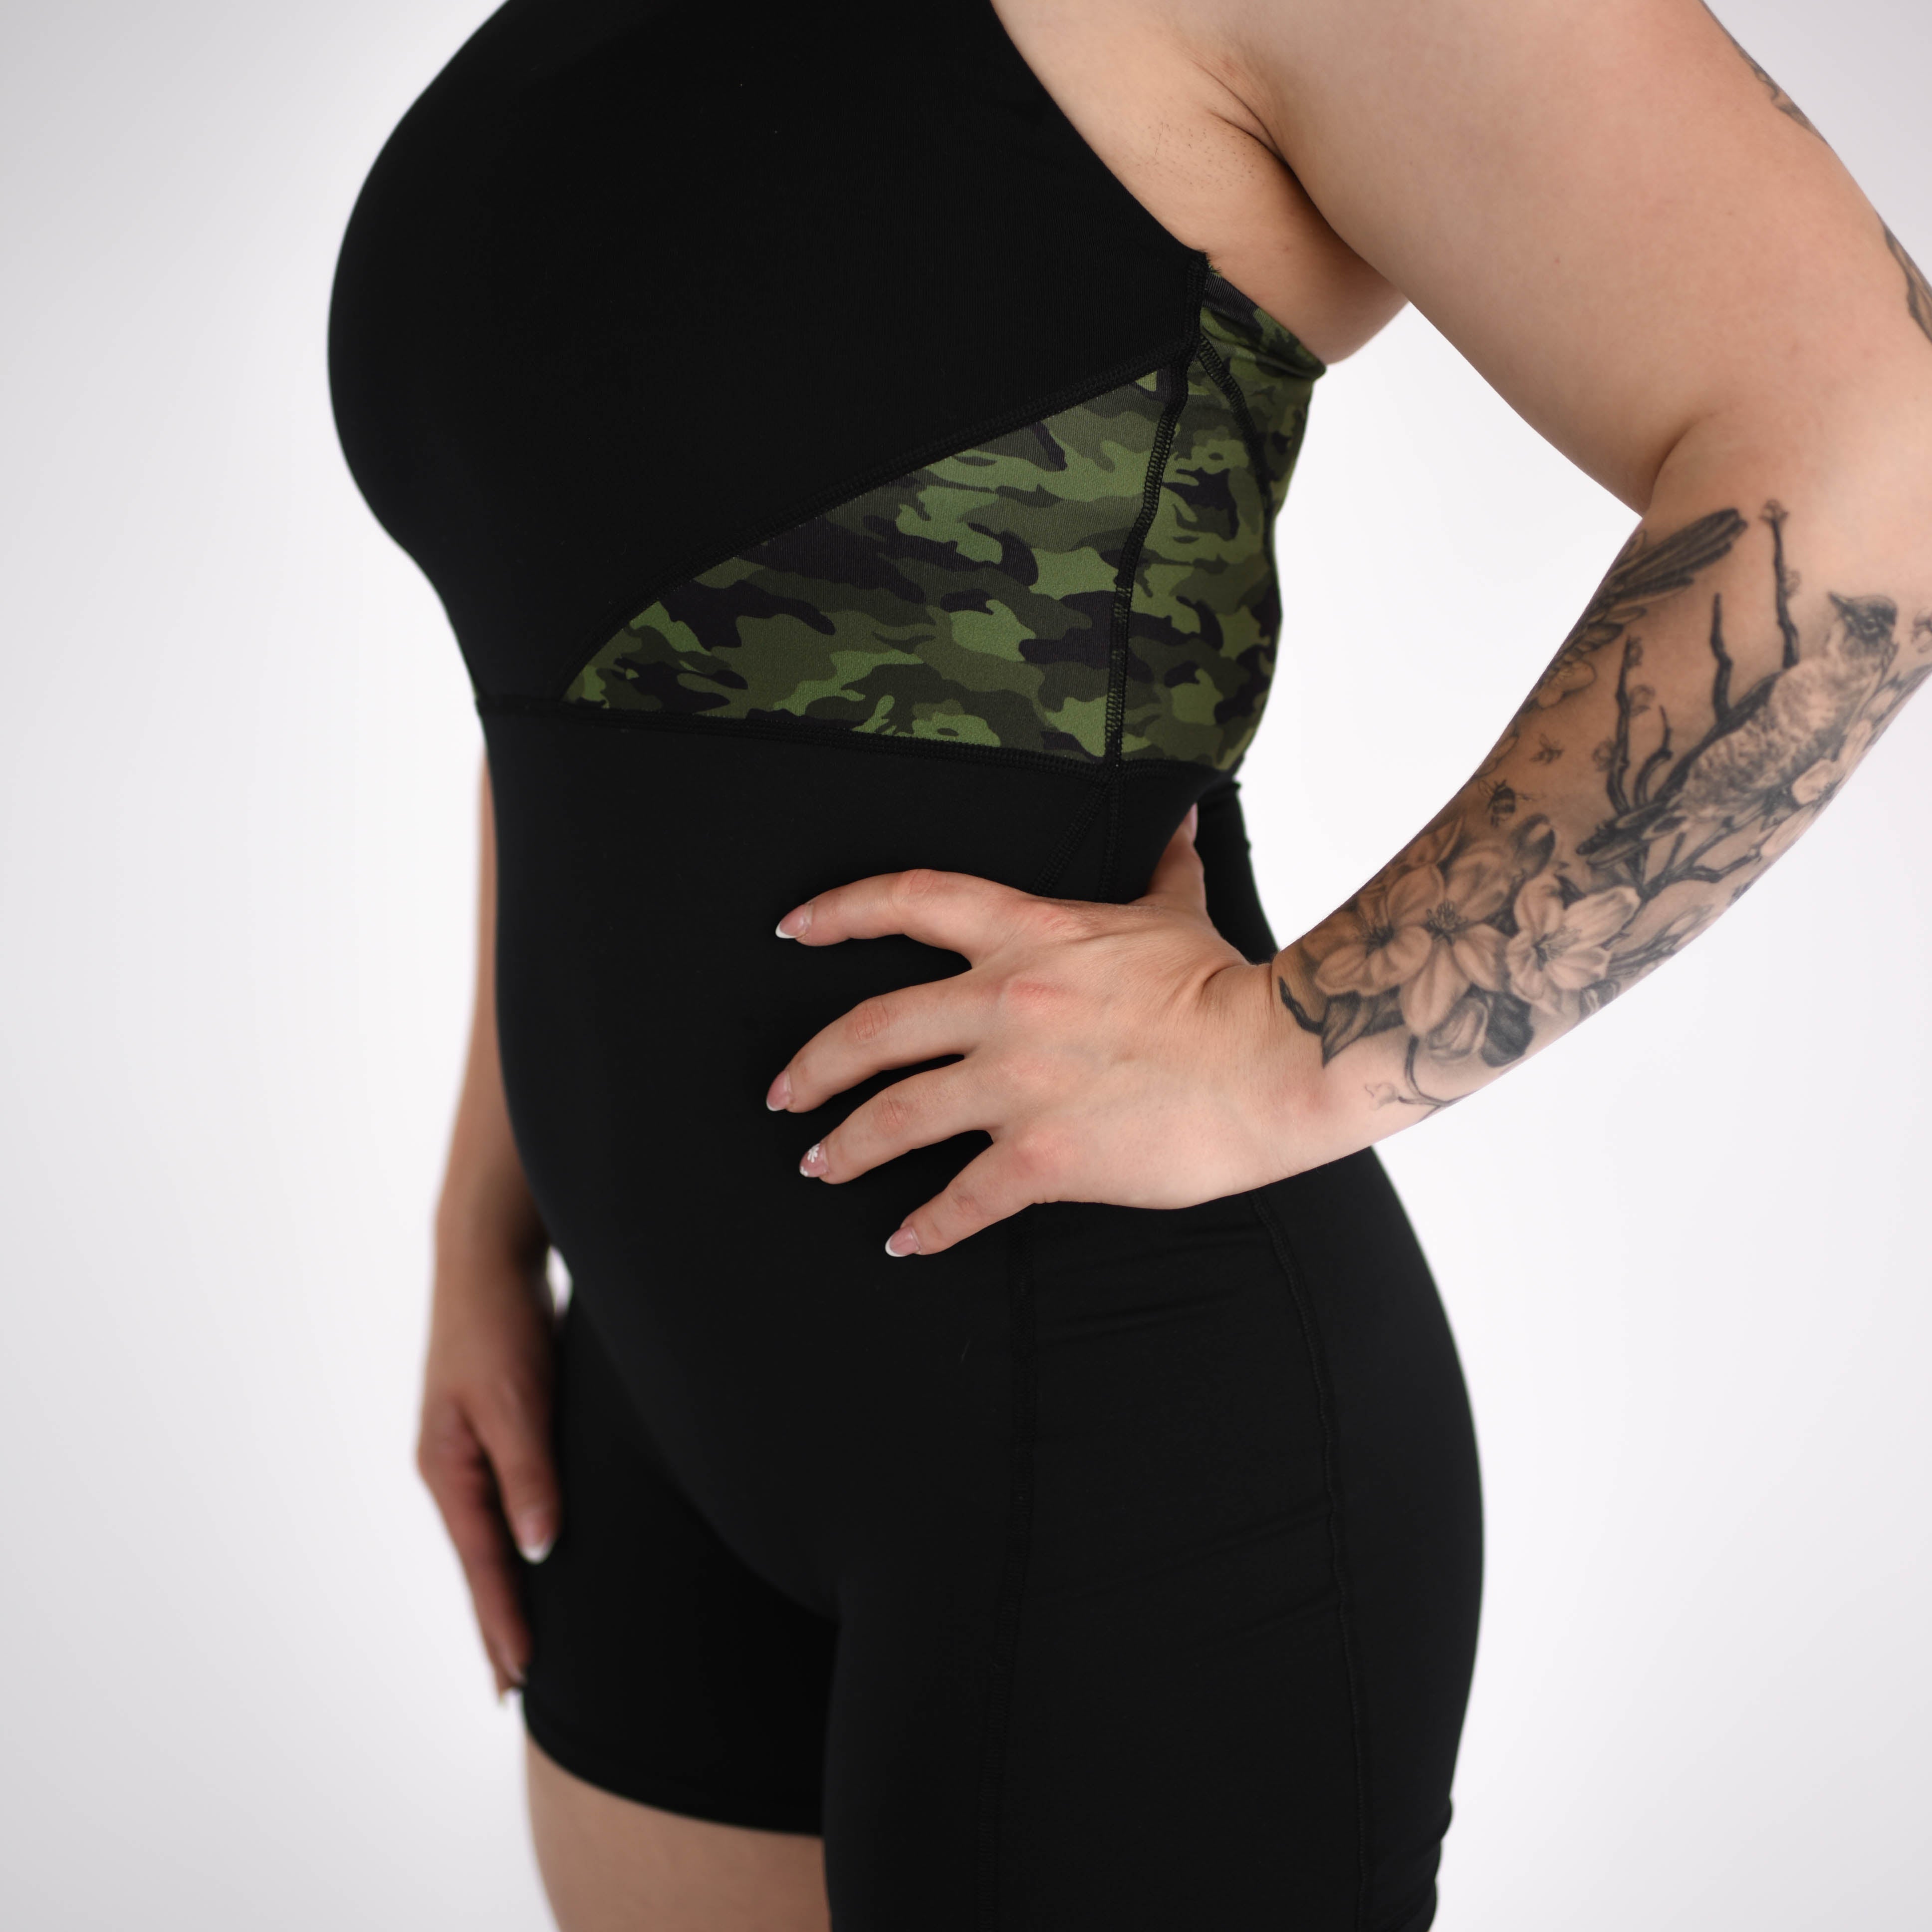 Women's Singlet in Black and Camo for Powerlifting and Olympic Lifting